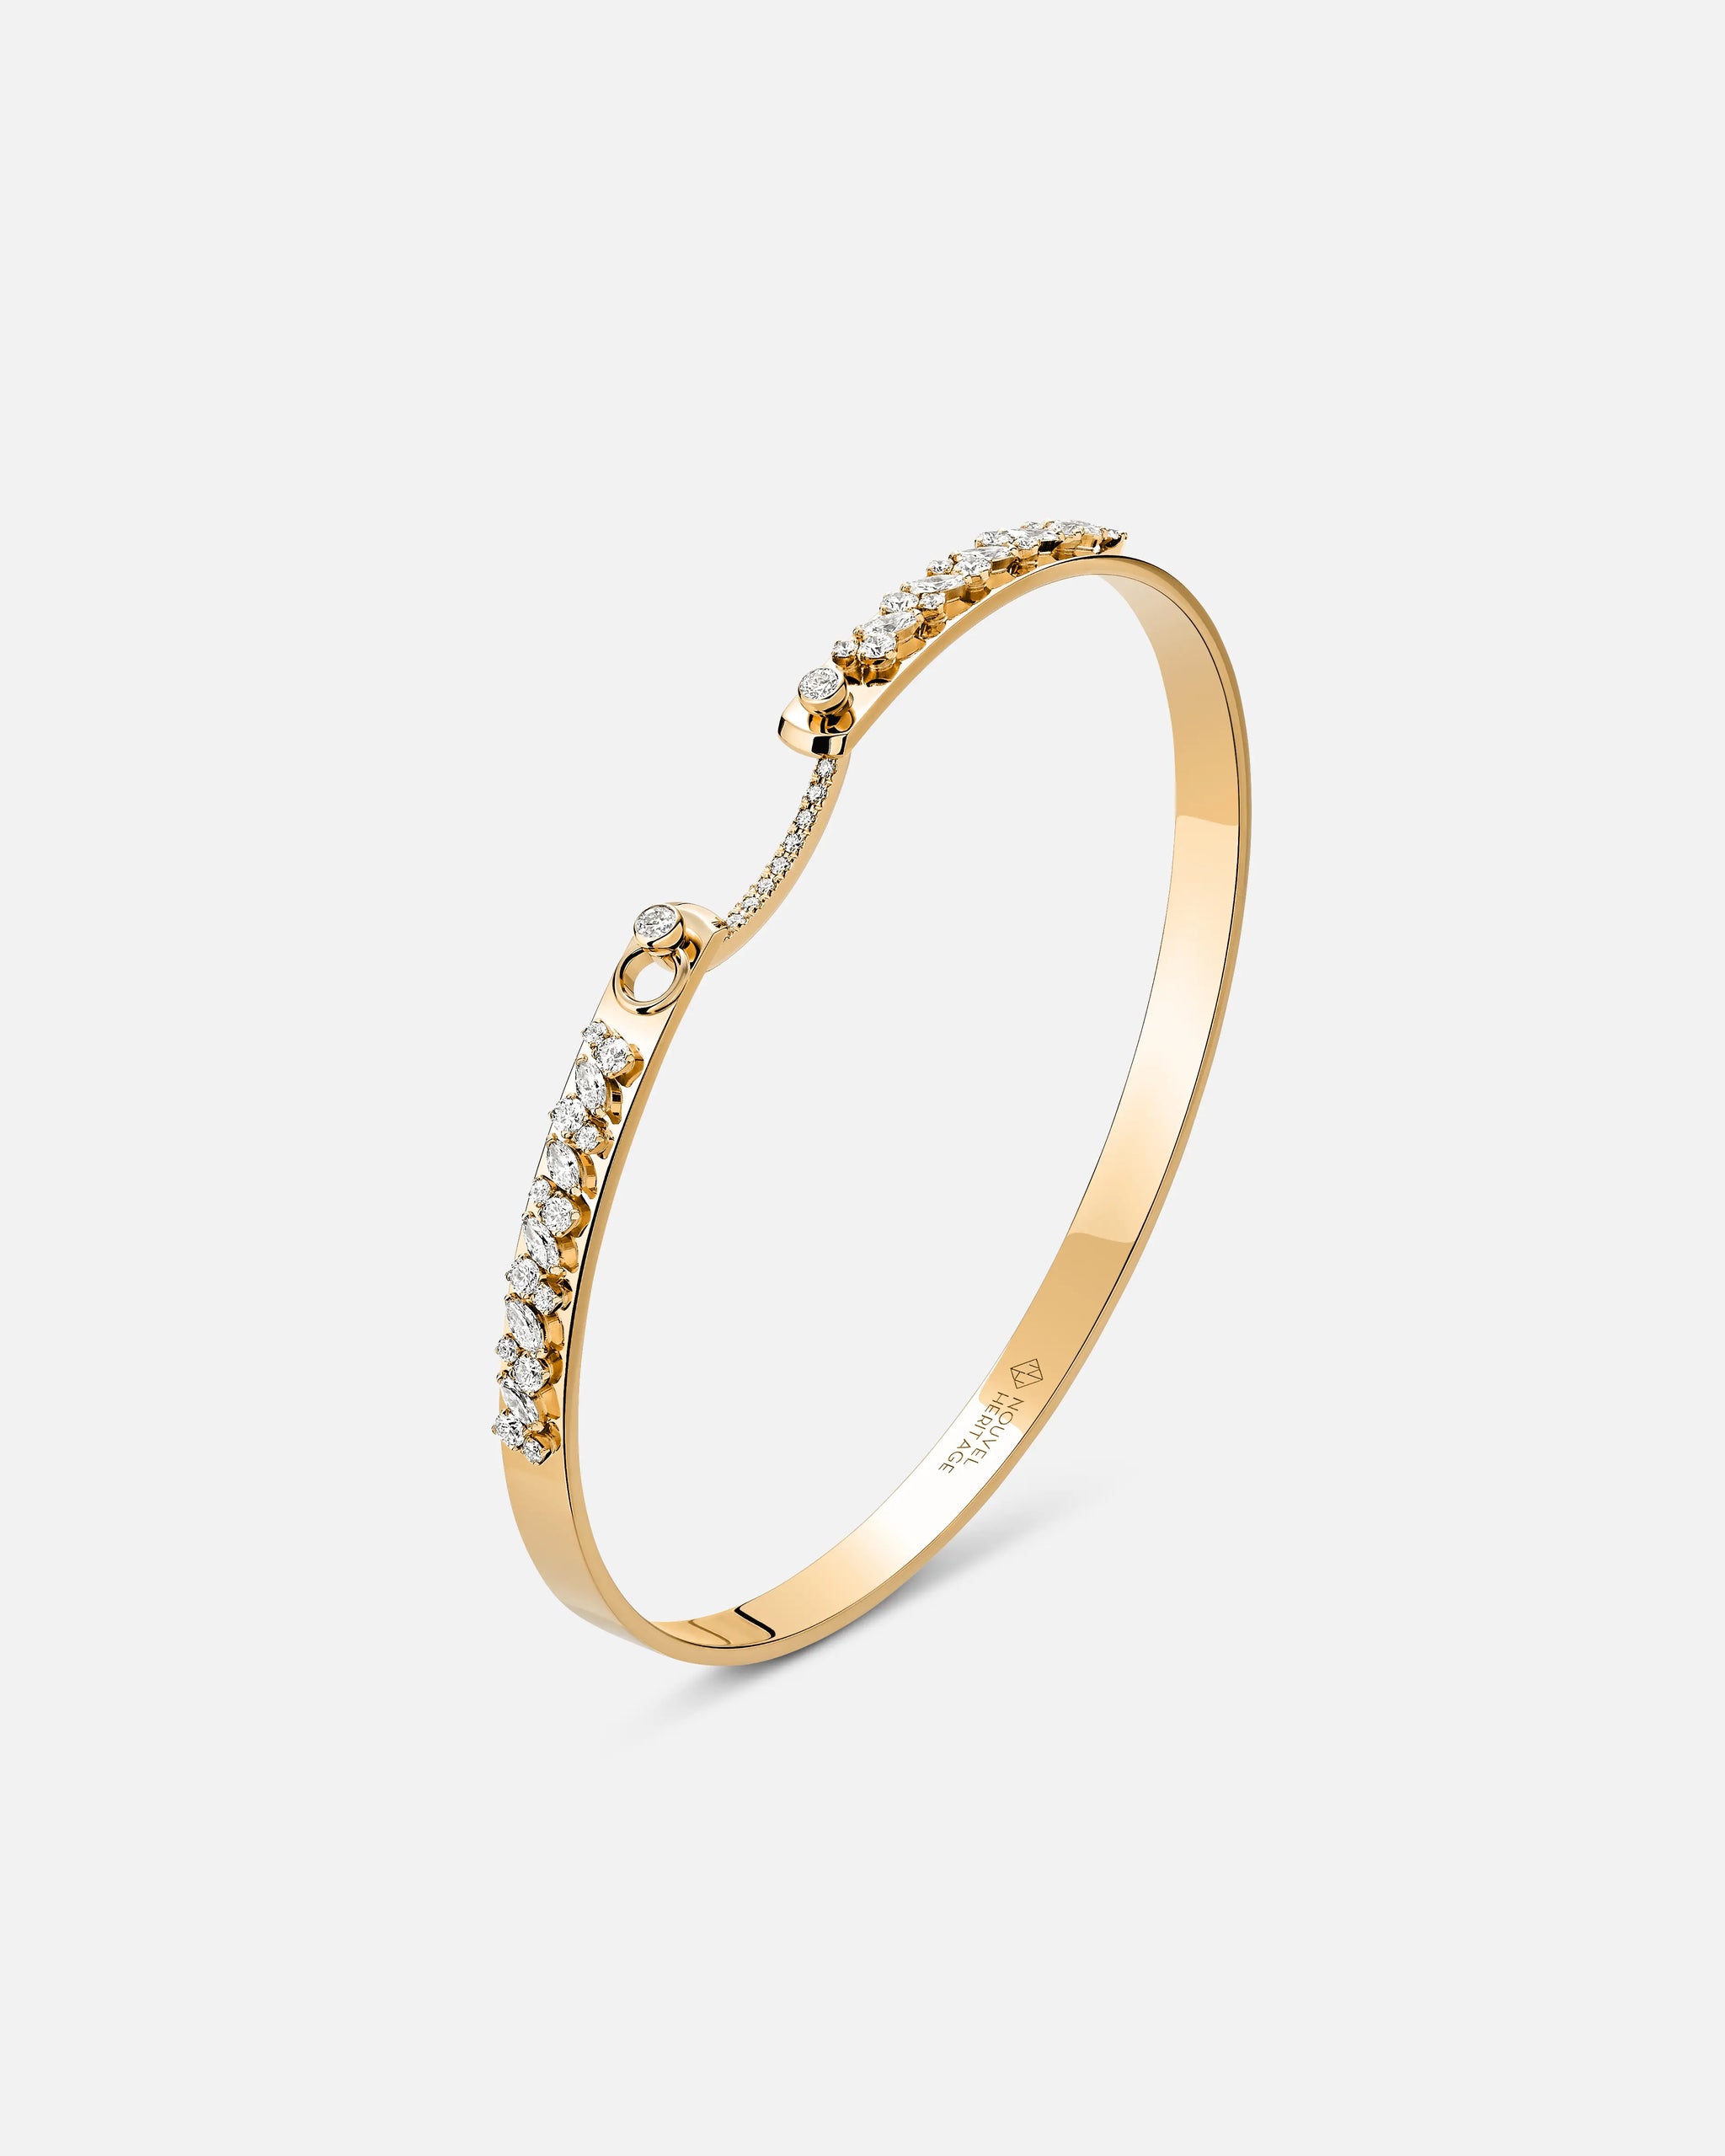 Under the Stars Mood Bangle in Yellow Gold - 1 - Nouvel Heritage